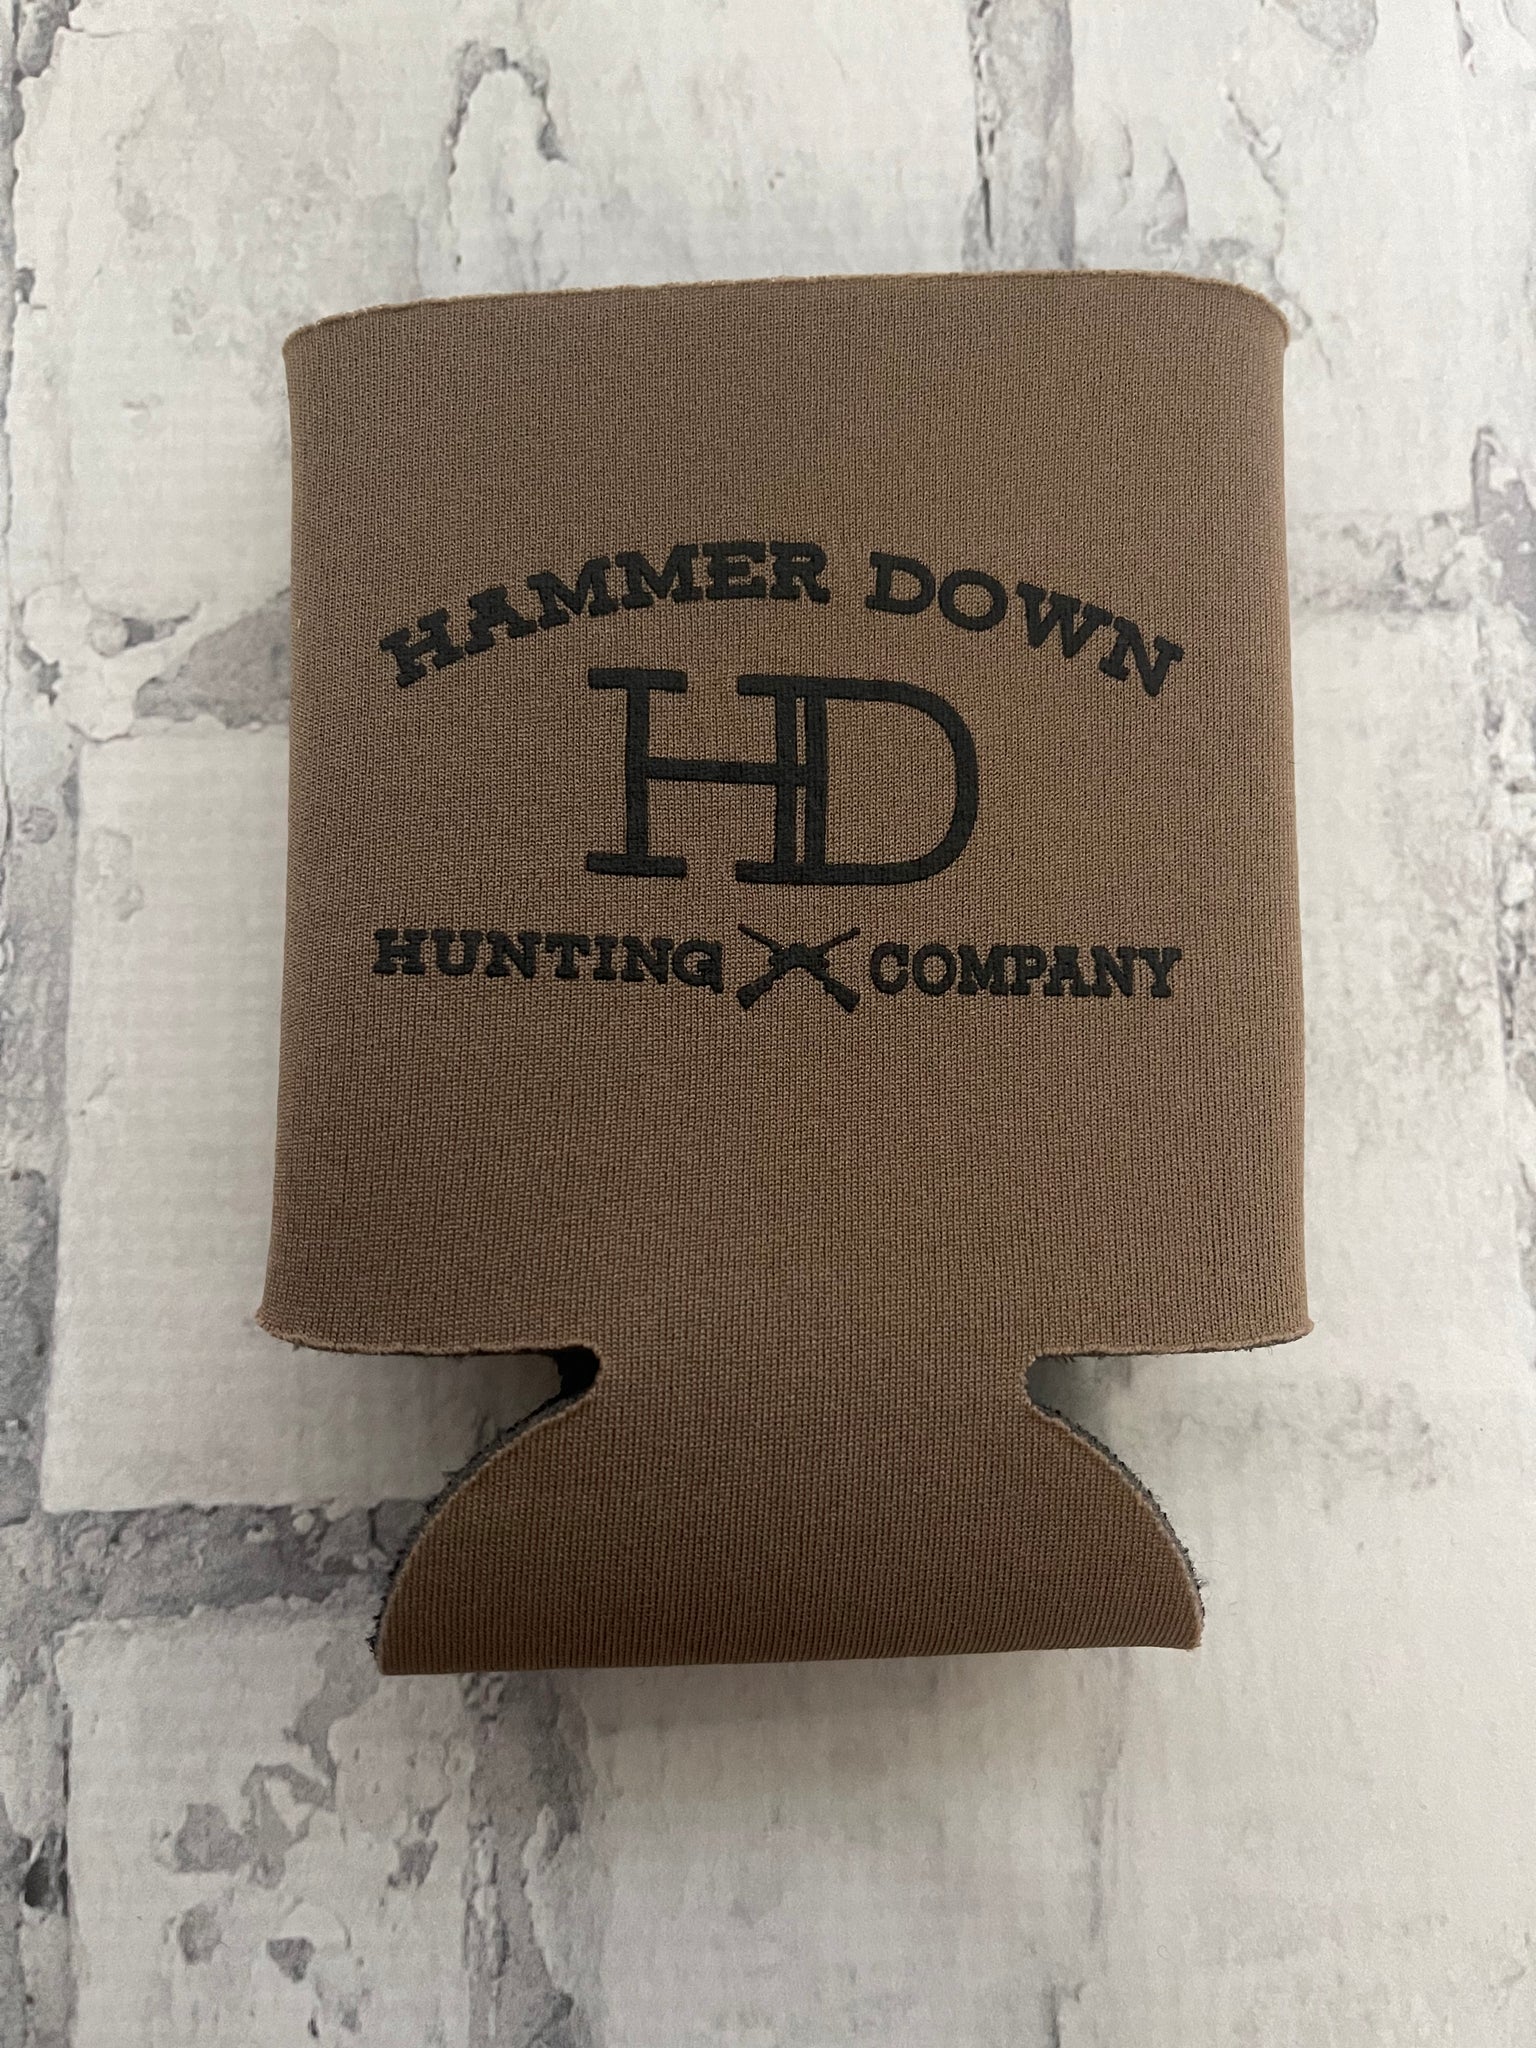 Hammer Down "HD Hunting" Cup Holder - Brown